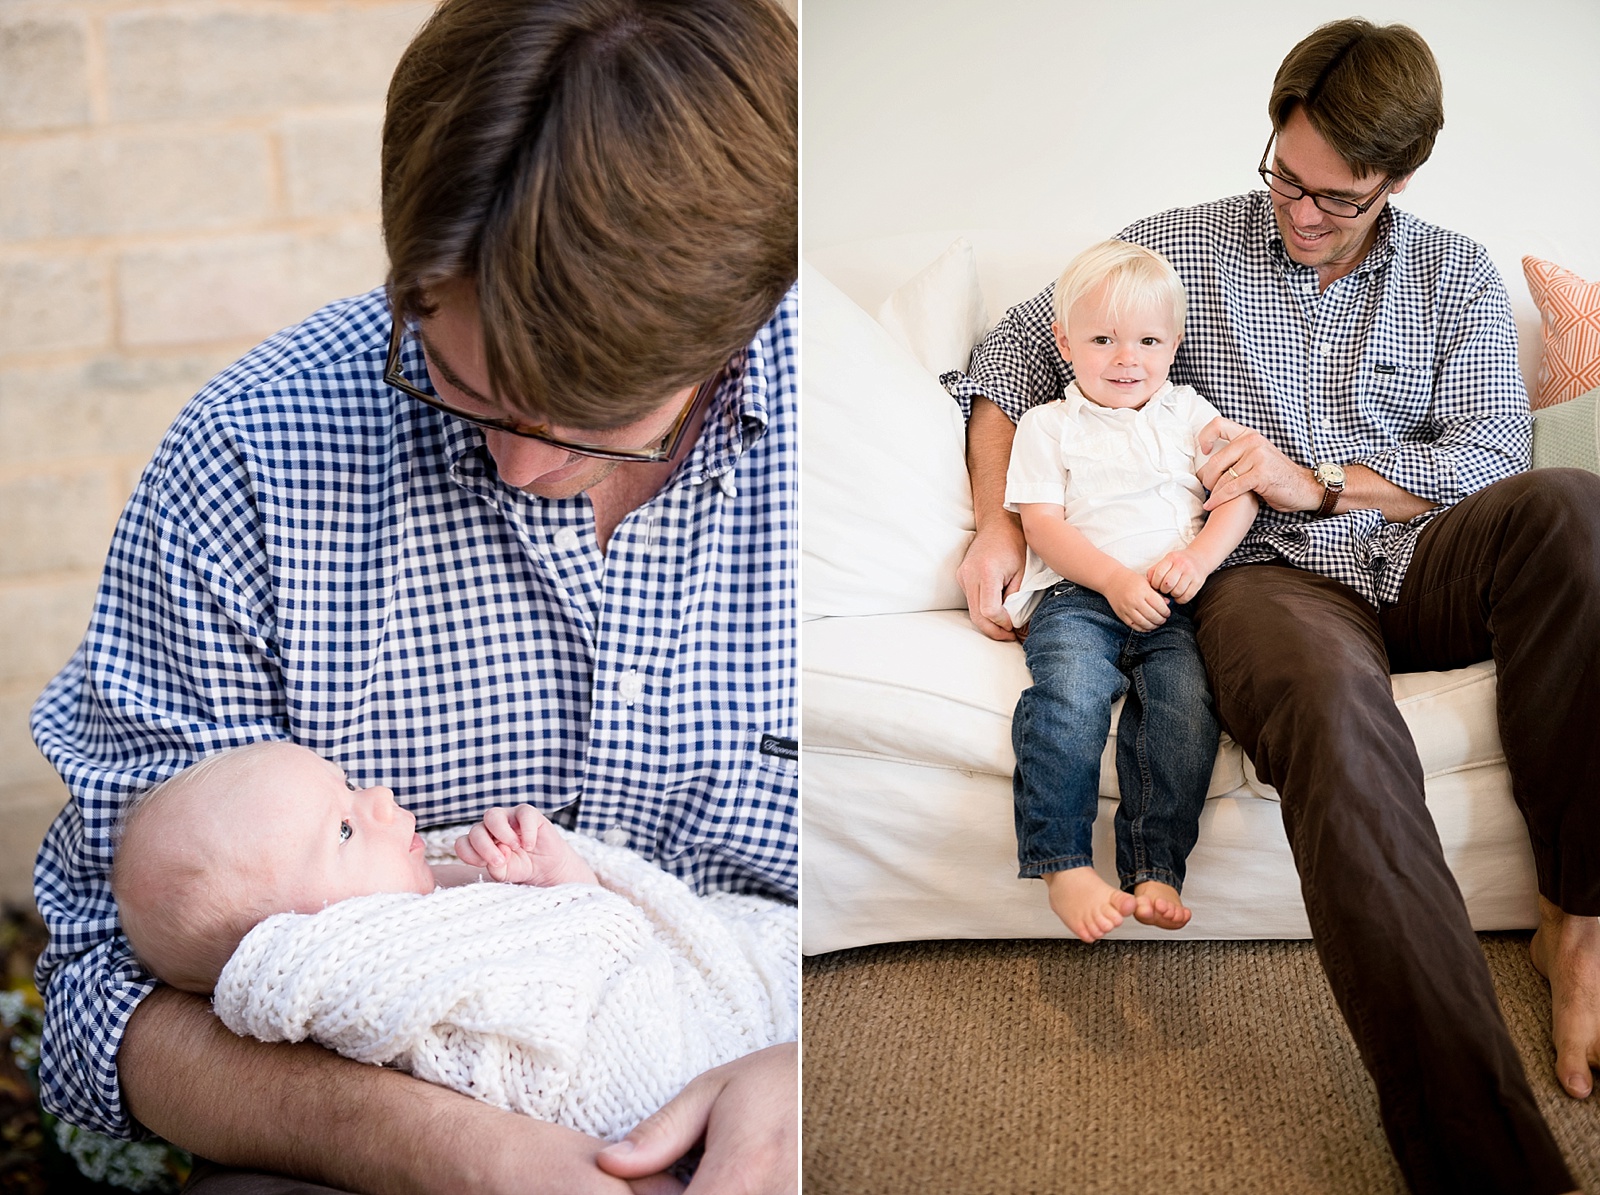 San Diego Family Portrait Session from photographer Lauren Nygard